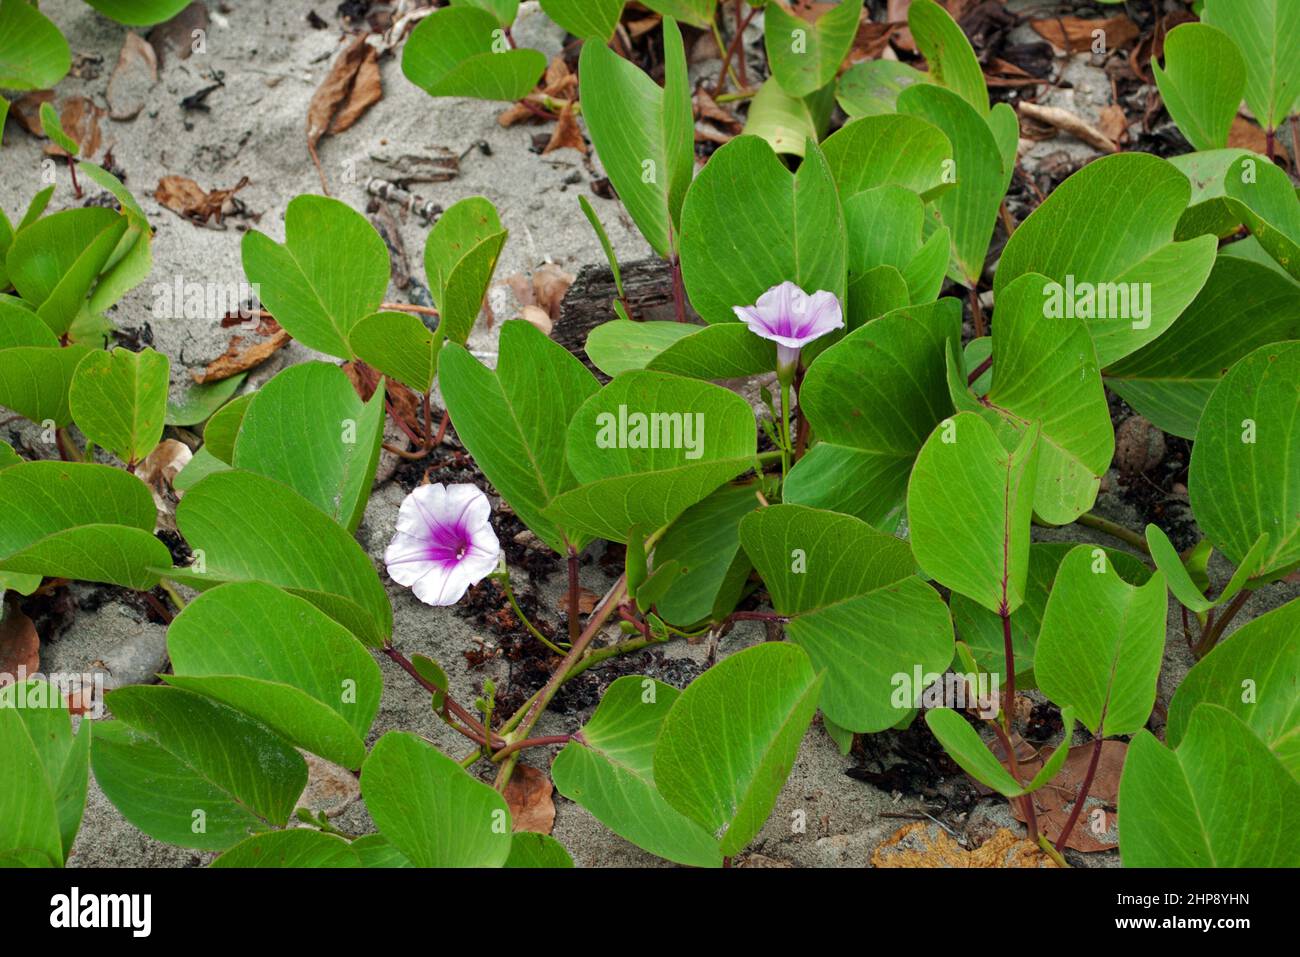 Ipomoea pes-caprae (beach morning glory) is a common pantropical creeping vine that grows on upper beach zones and is salt tolerant. Stock Photo